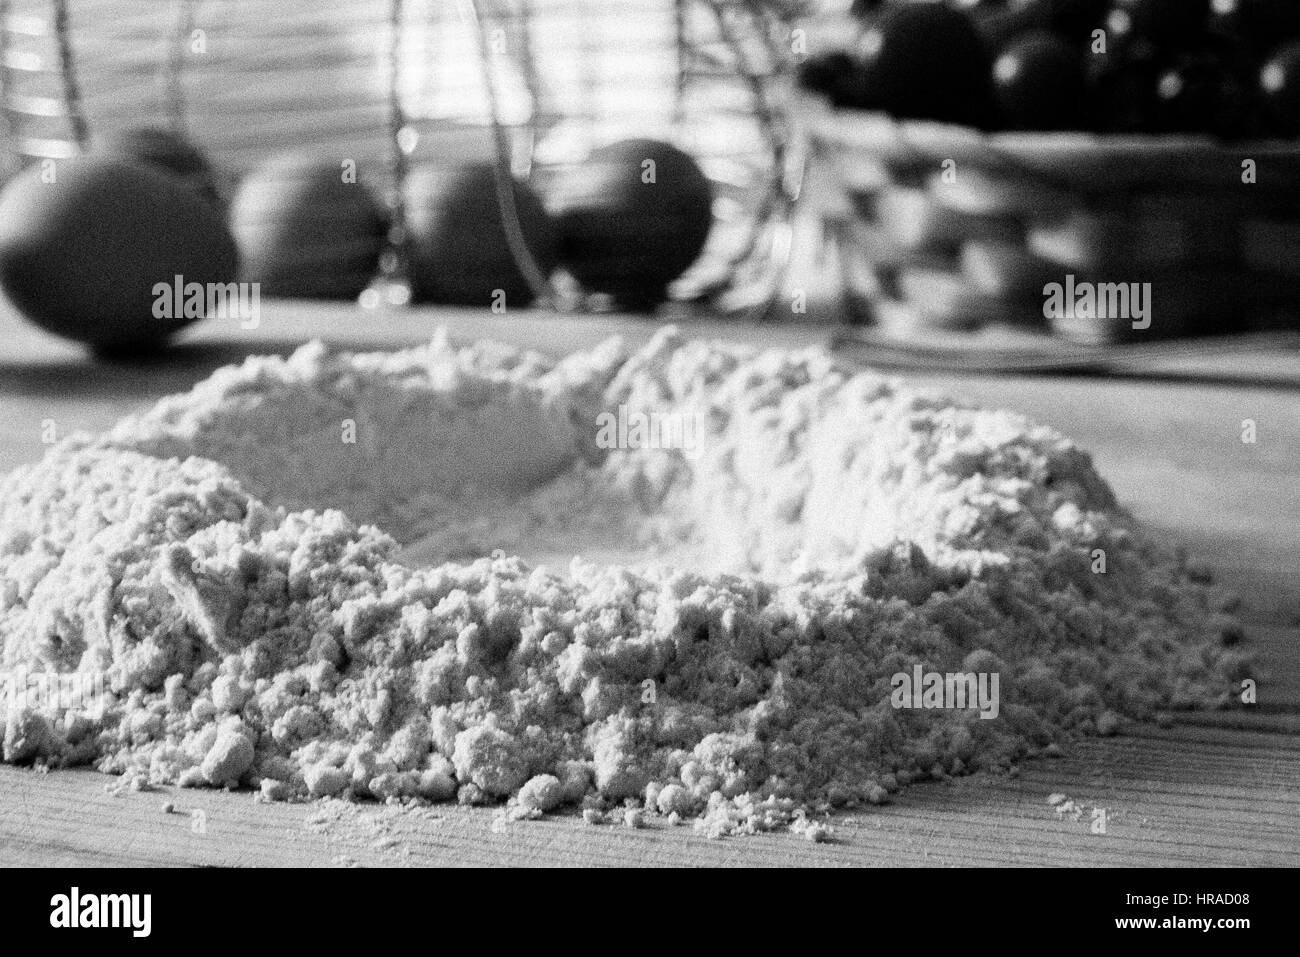 Black and white image of Making pasta dough in an Italian kitchen showing flour and eggs Stock Photo